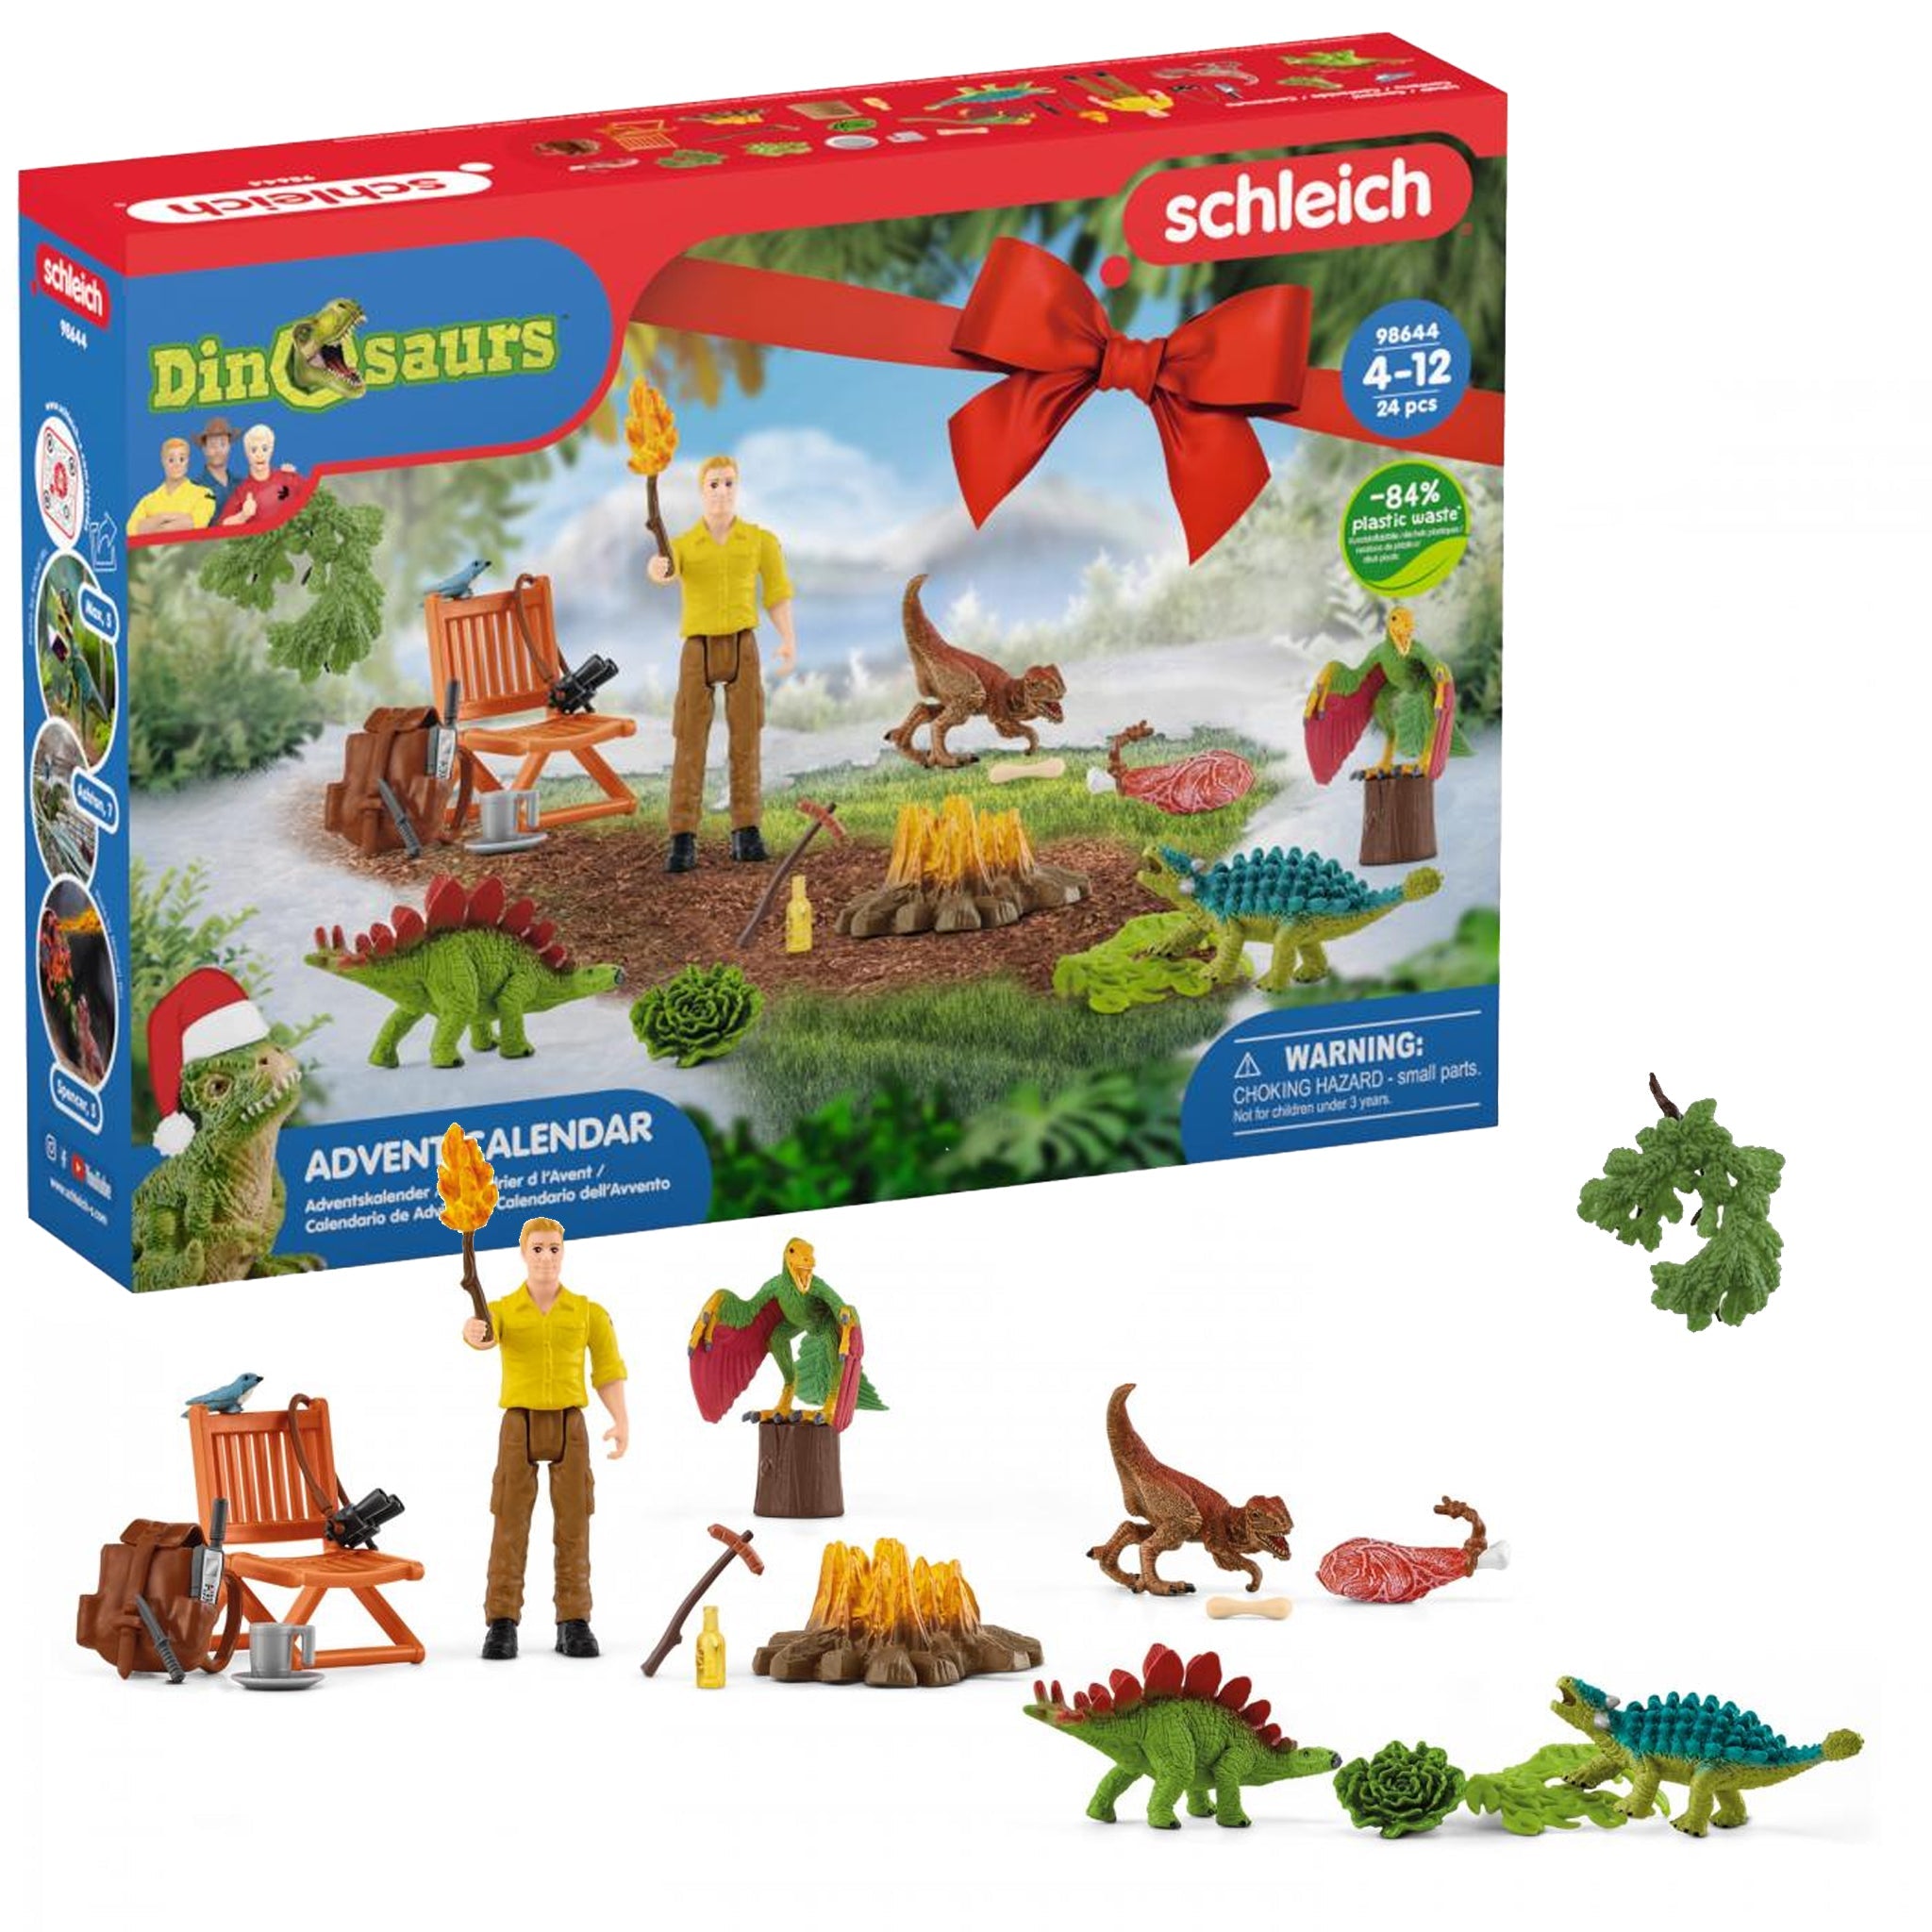 Schleich USA Reveals Double-Digit Growth, 2021 Product Launches